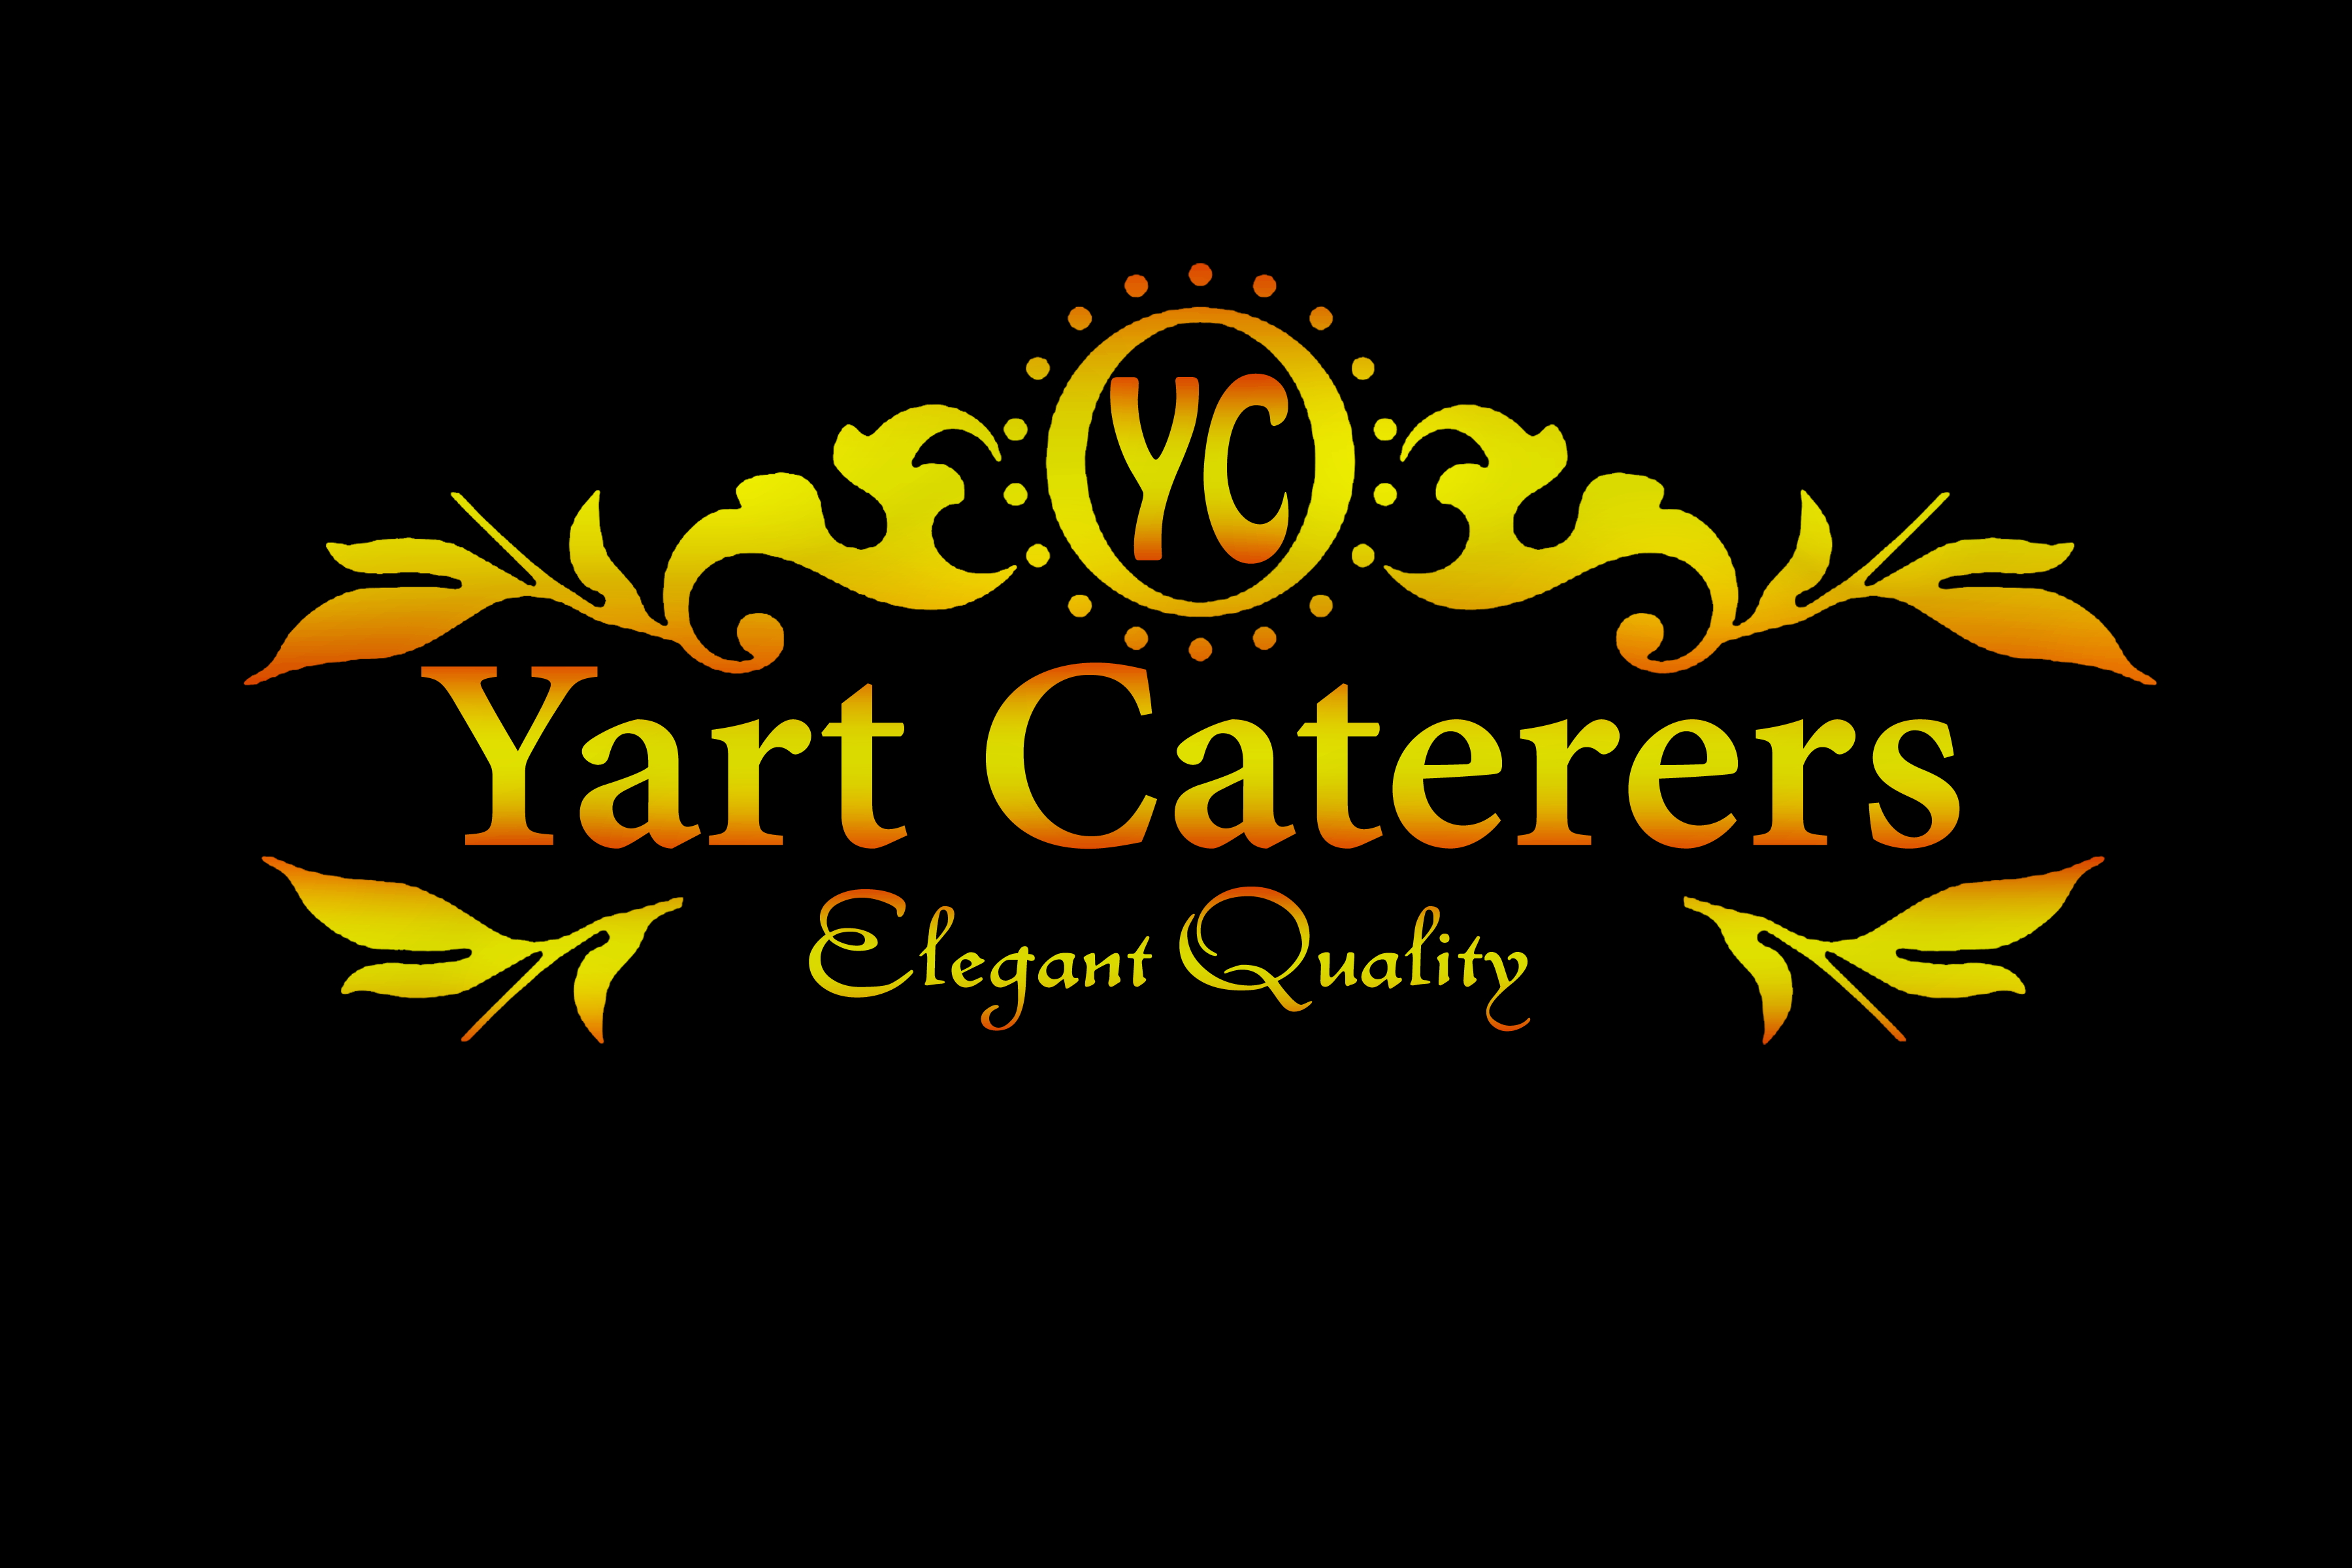 Yart Caterers - Best caterers in Chandigarh|Banquet Halls|Event Services